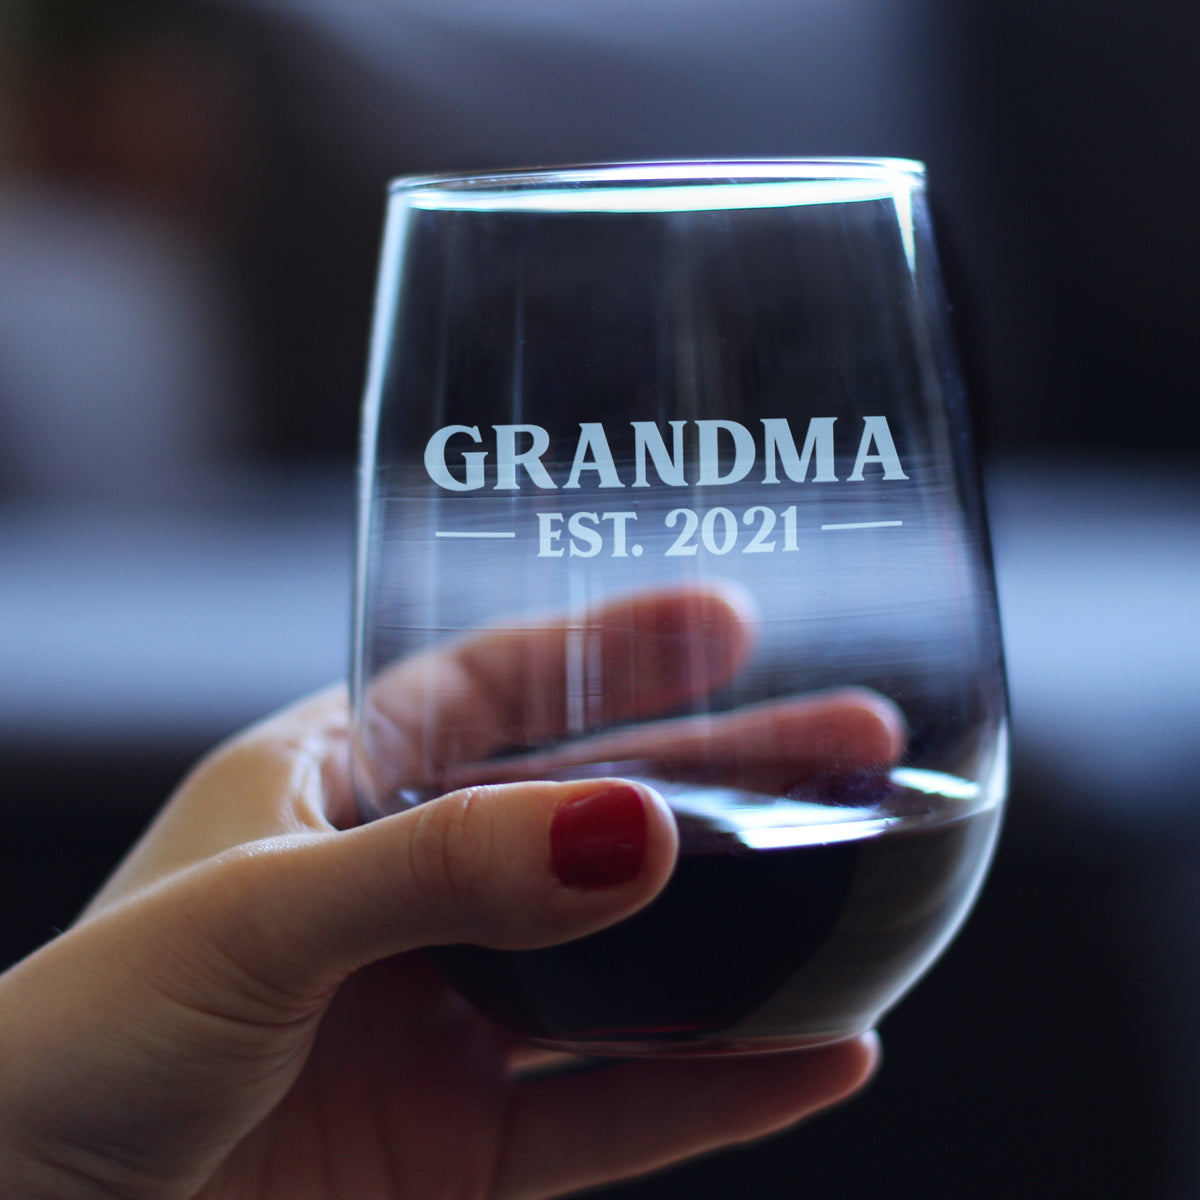 Grandma Est 2021 - New Grandmother Stemless Wine Glass Gift for First Time Grandparents - Bold 17 Oz Large Glasses